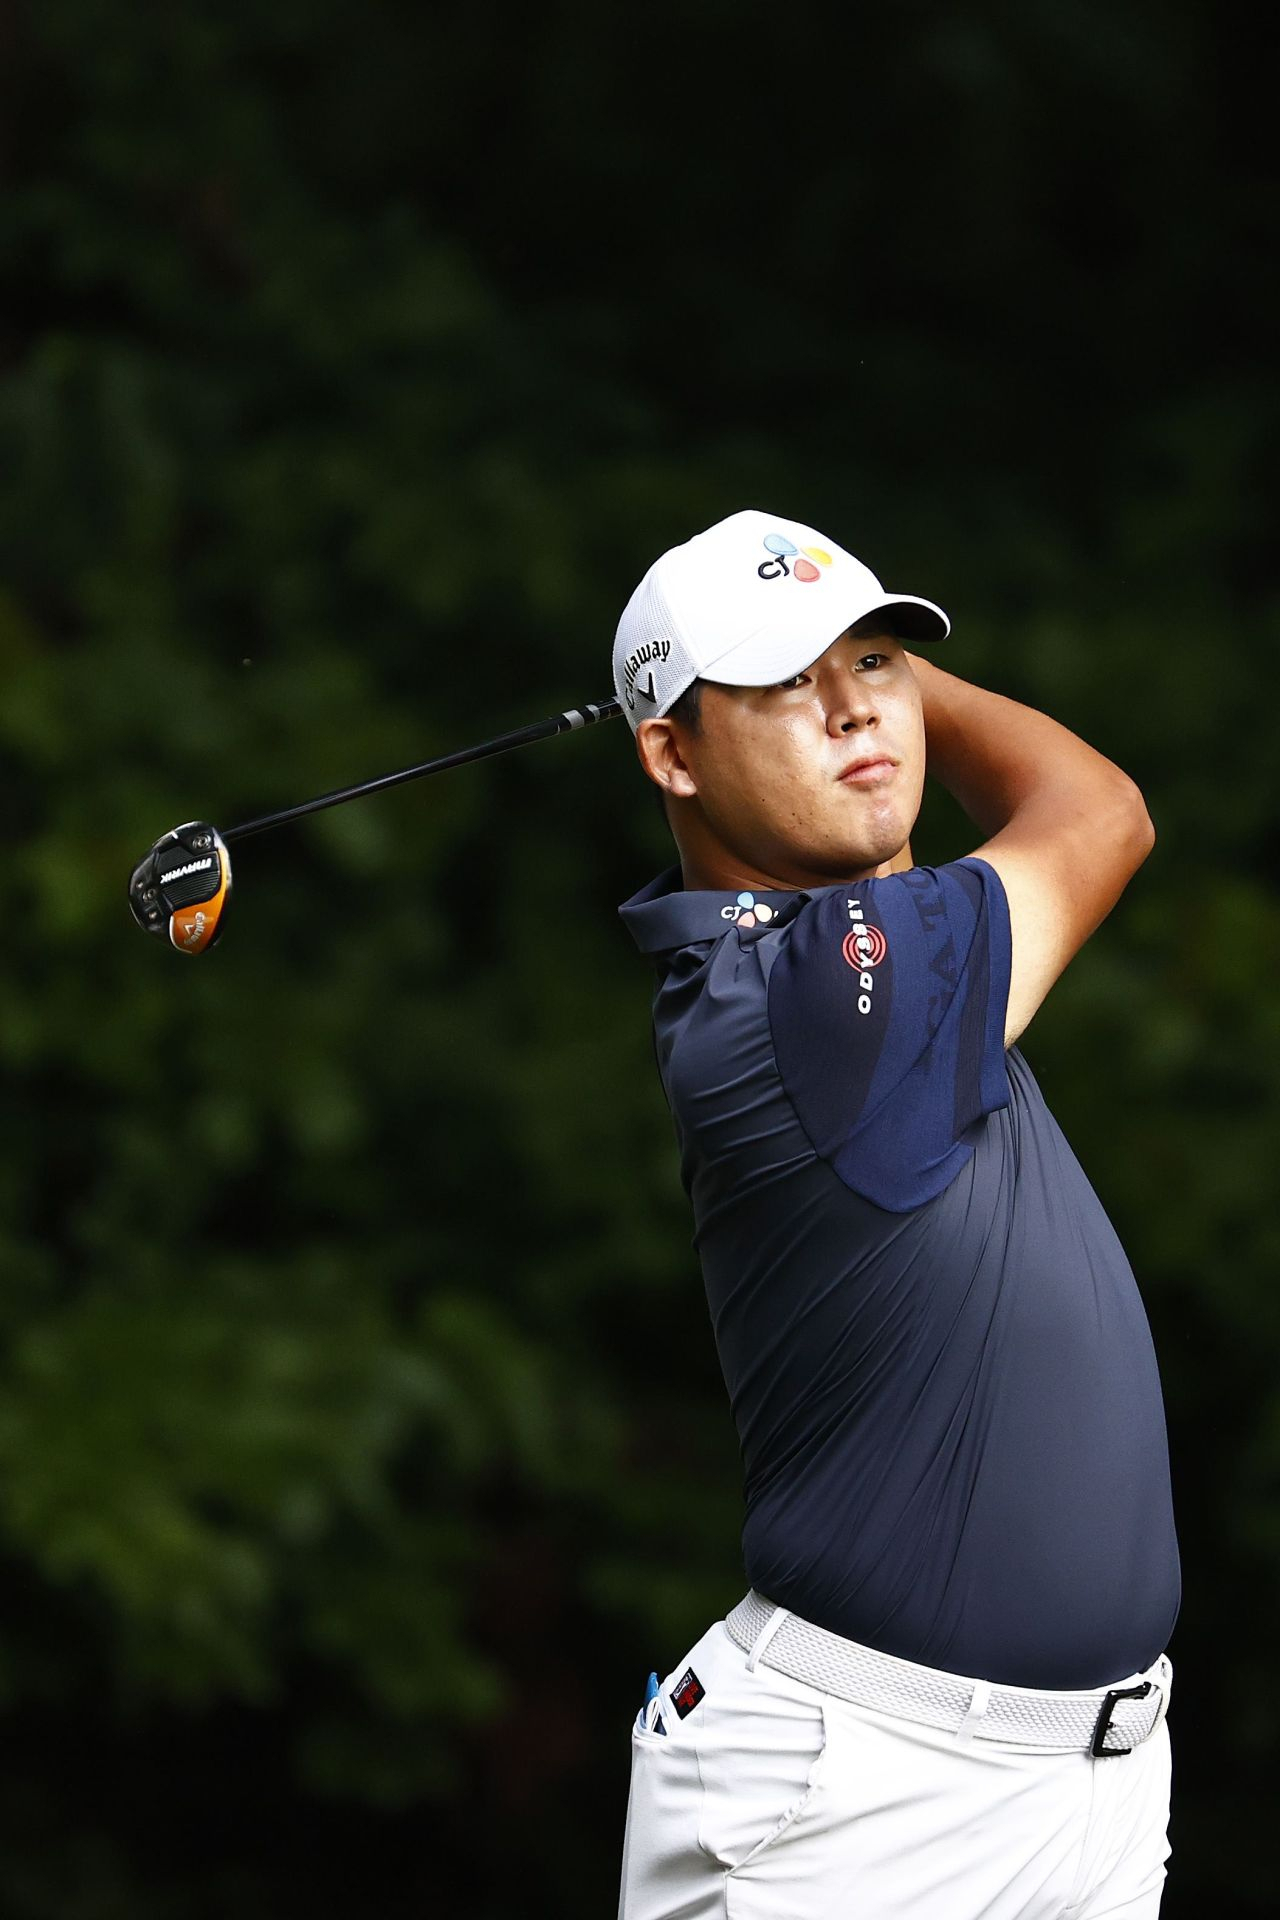 Kim Si-woo plays his shot from the second tee during the final round of the Wyndham Championship at Sedgefield Country Club on Aug.17,2021 in Greensboro, North Carolina. (AFP)